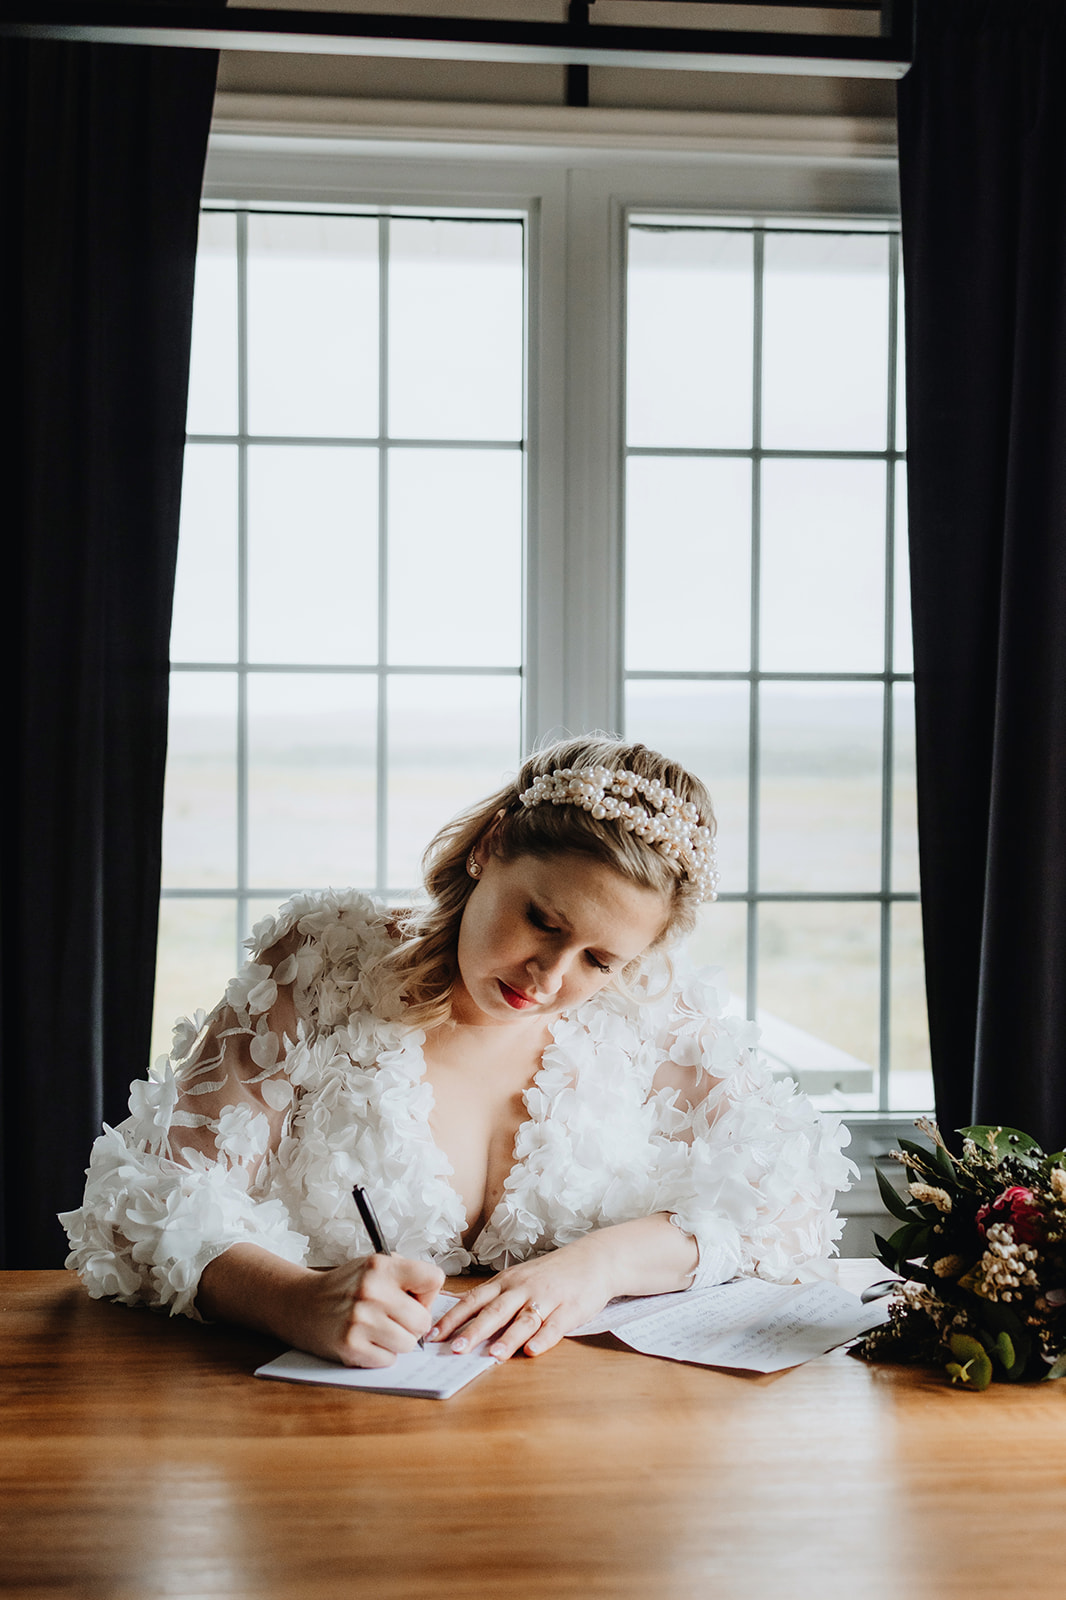 Bride is finishing writing her wedding vows in the morning of her wedding in Iceland